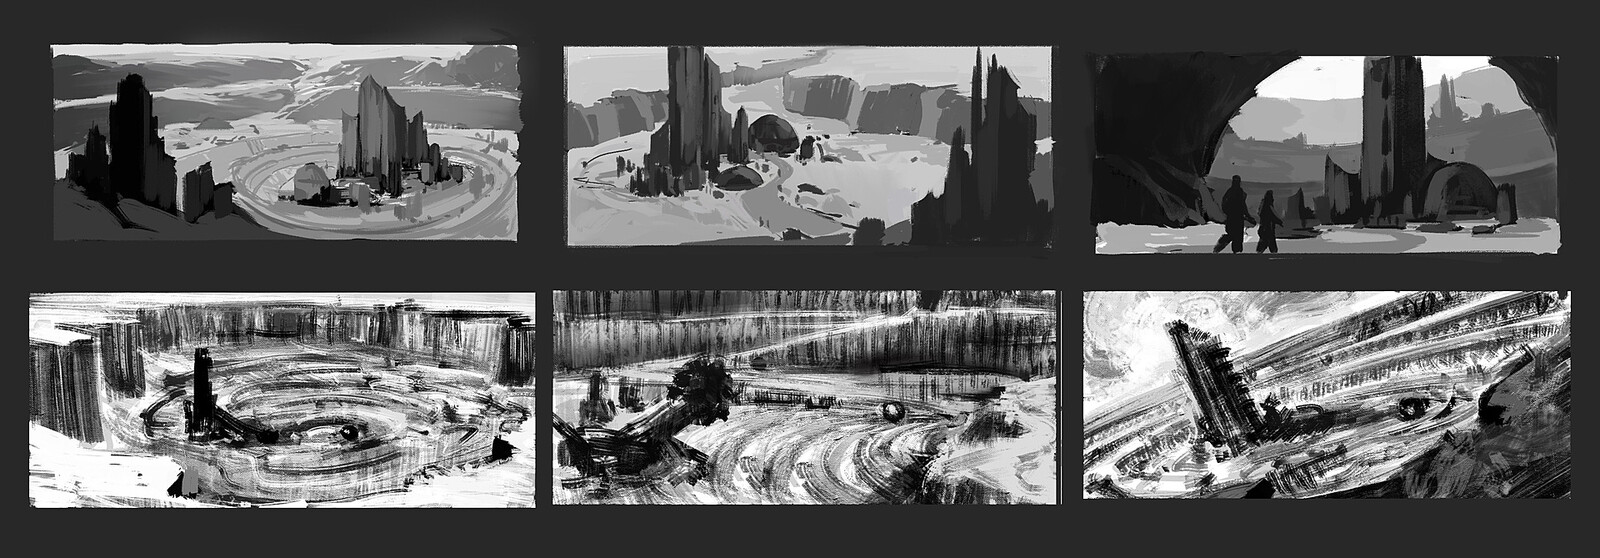 initial comps and sketches